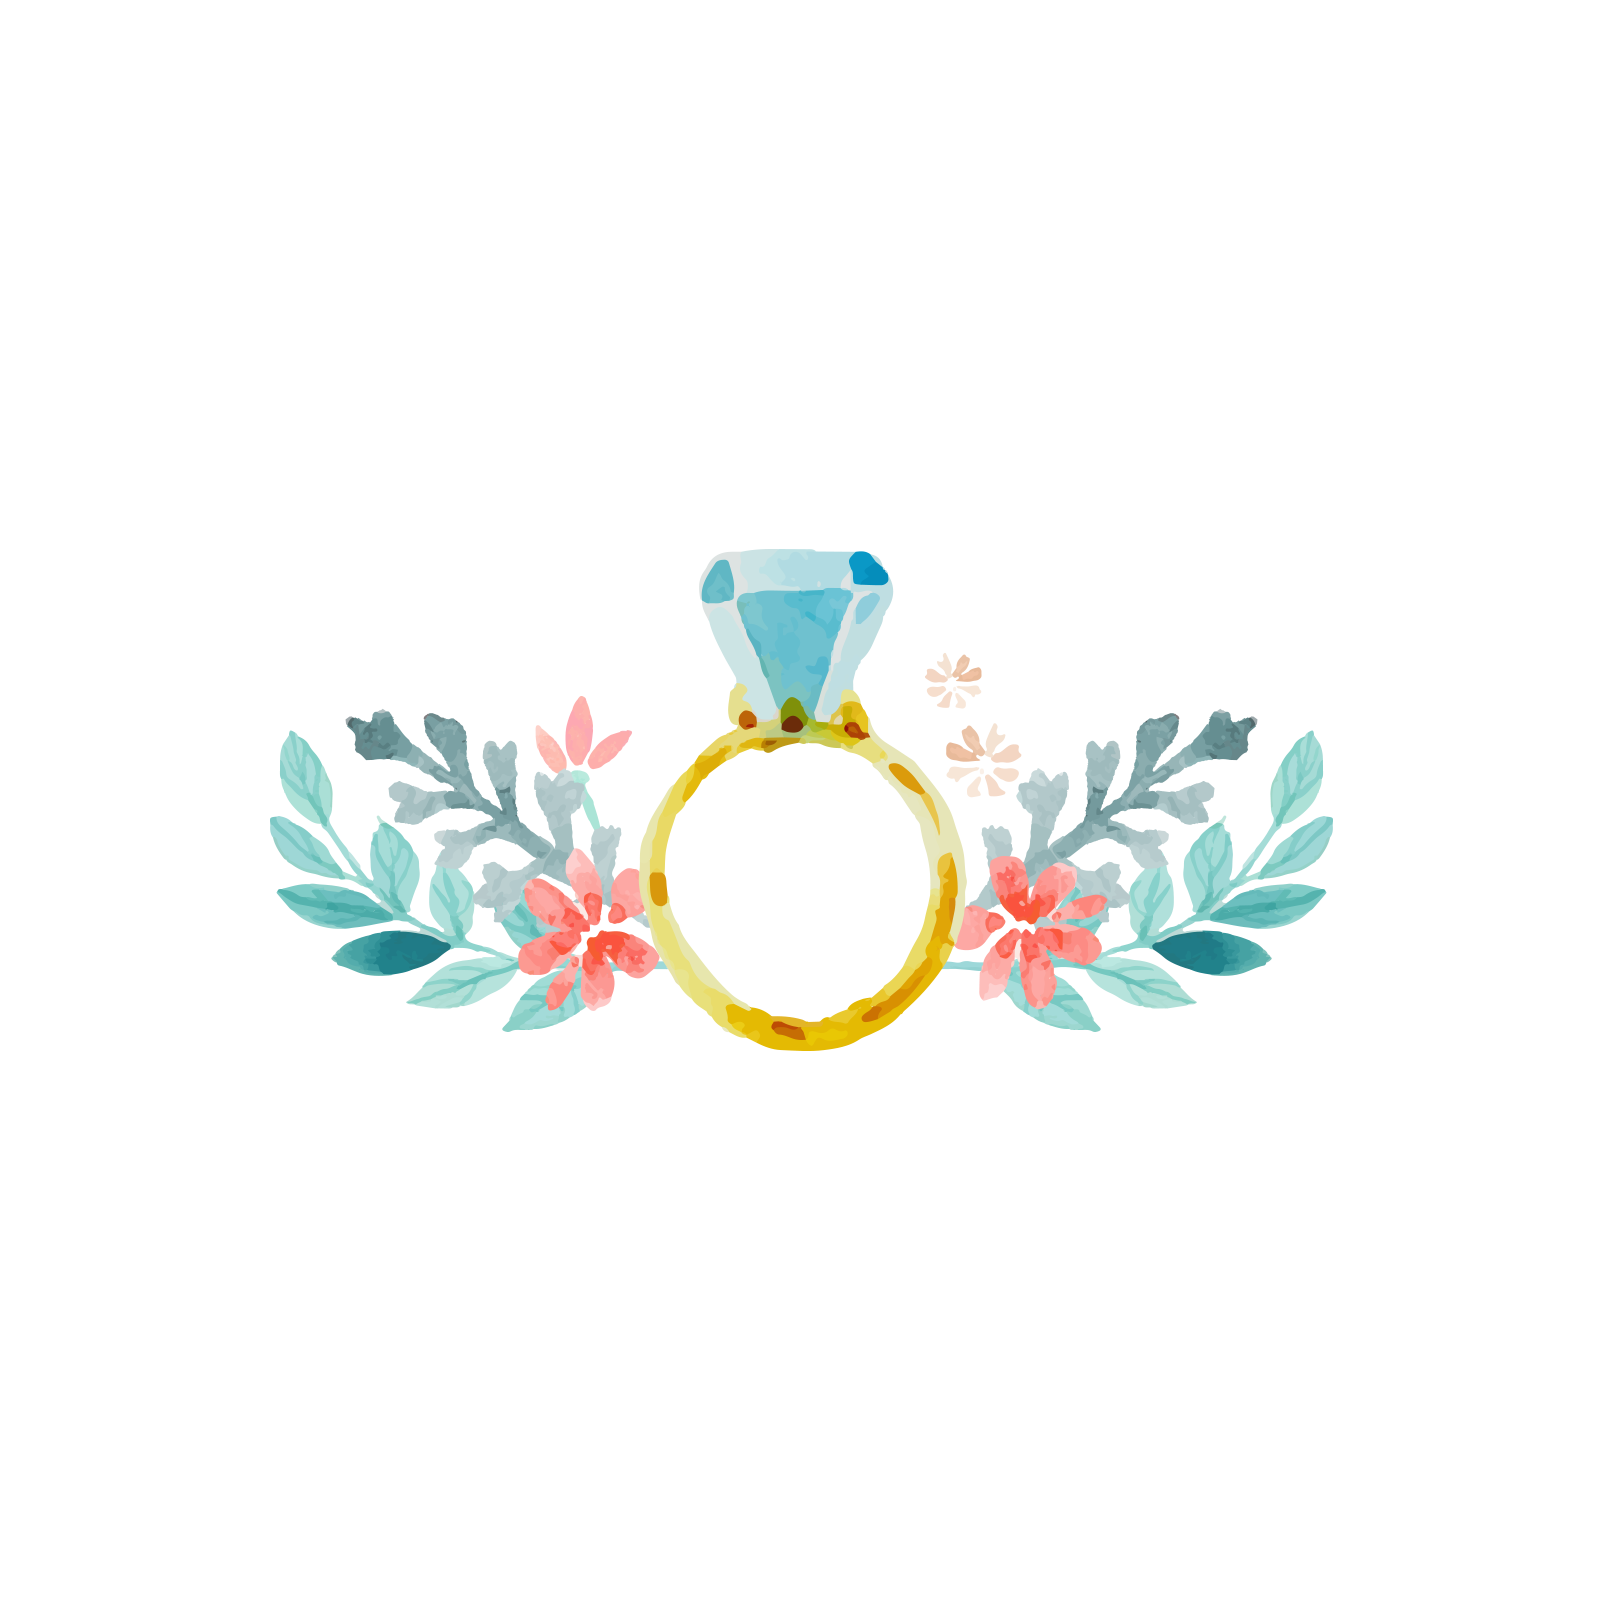 And Blue Diamond Art Leaves Wedding Rings Clipart